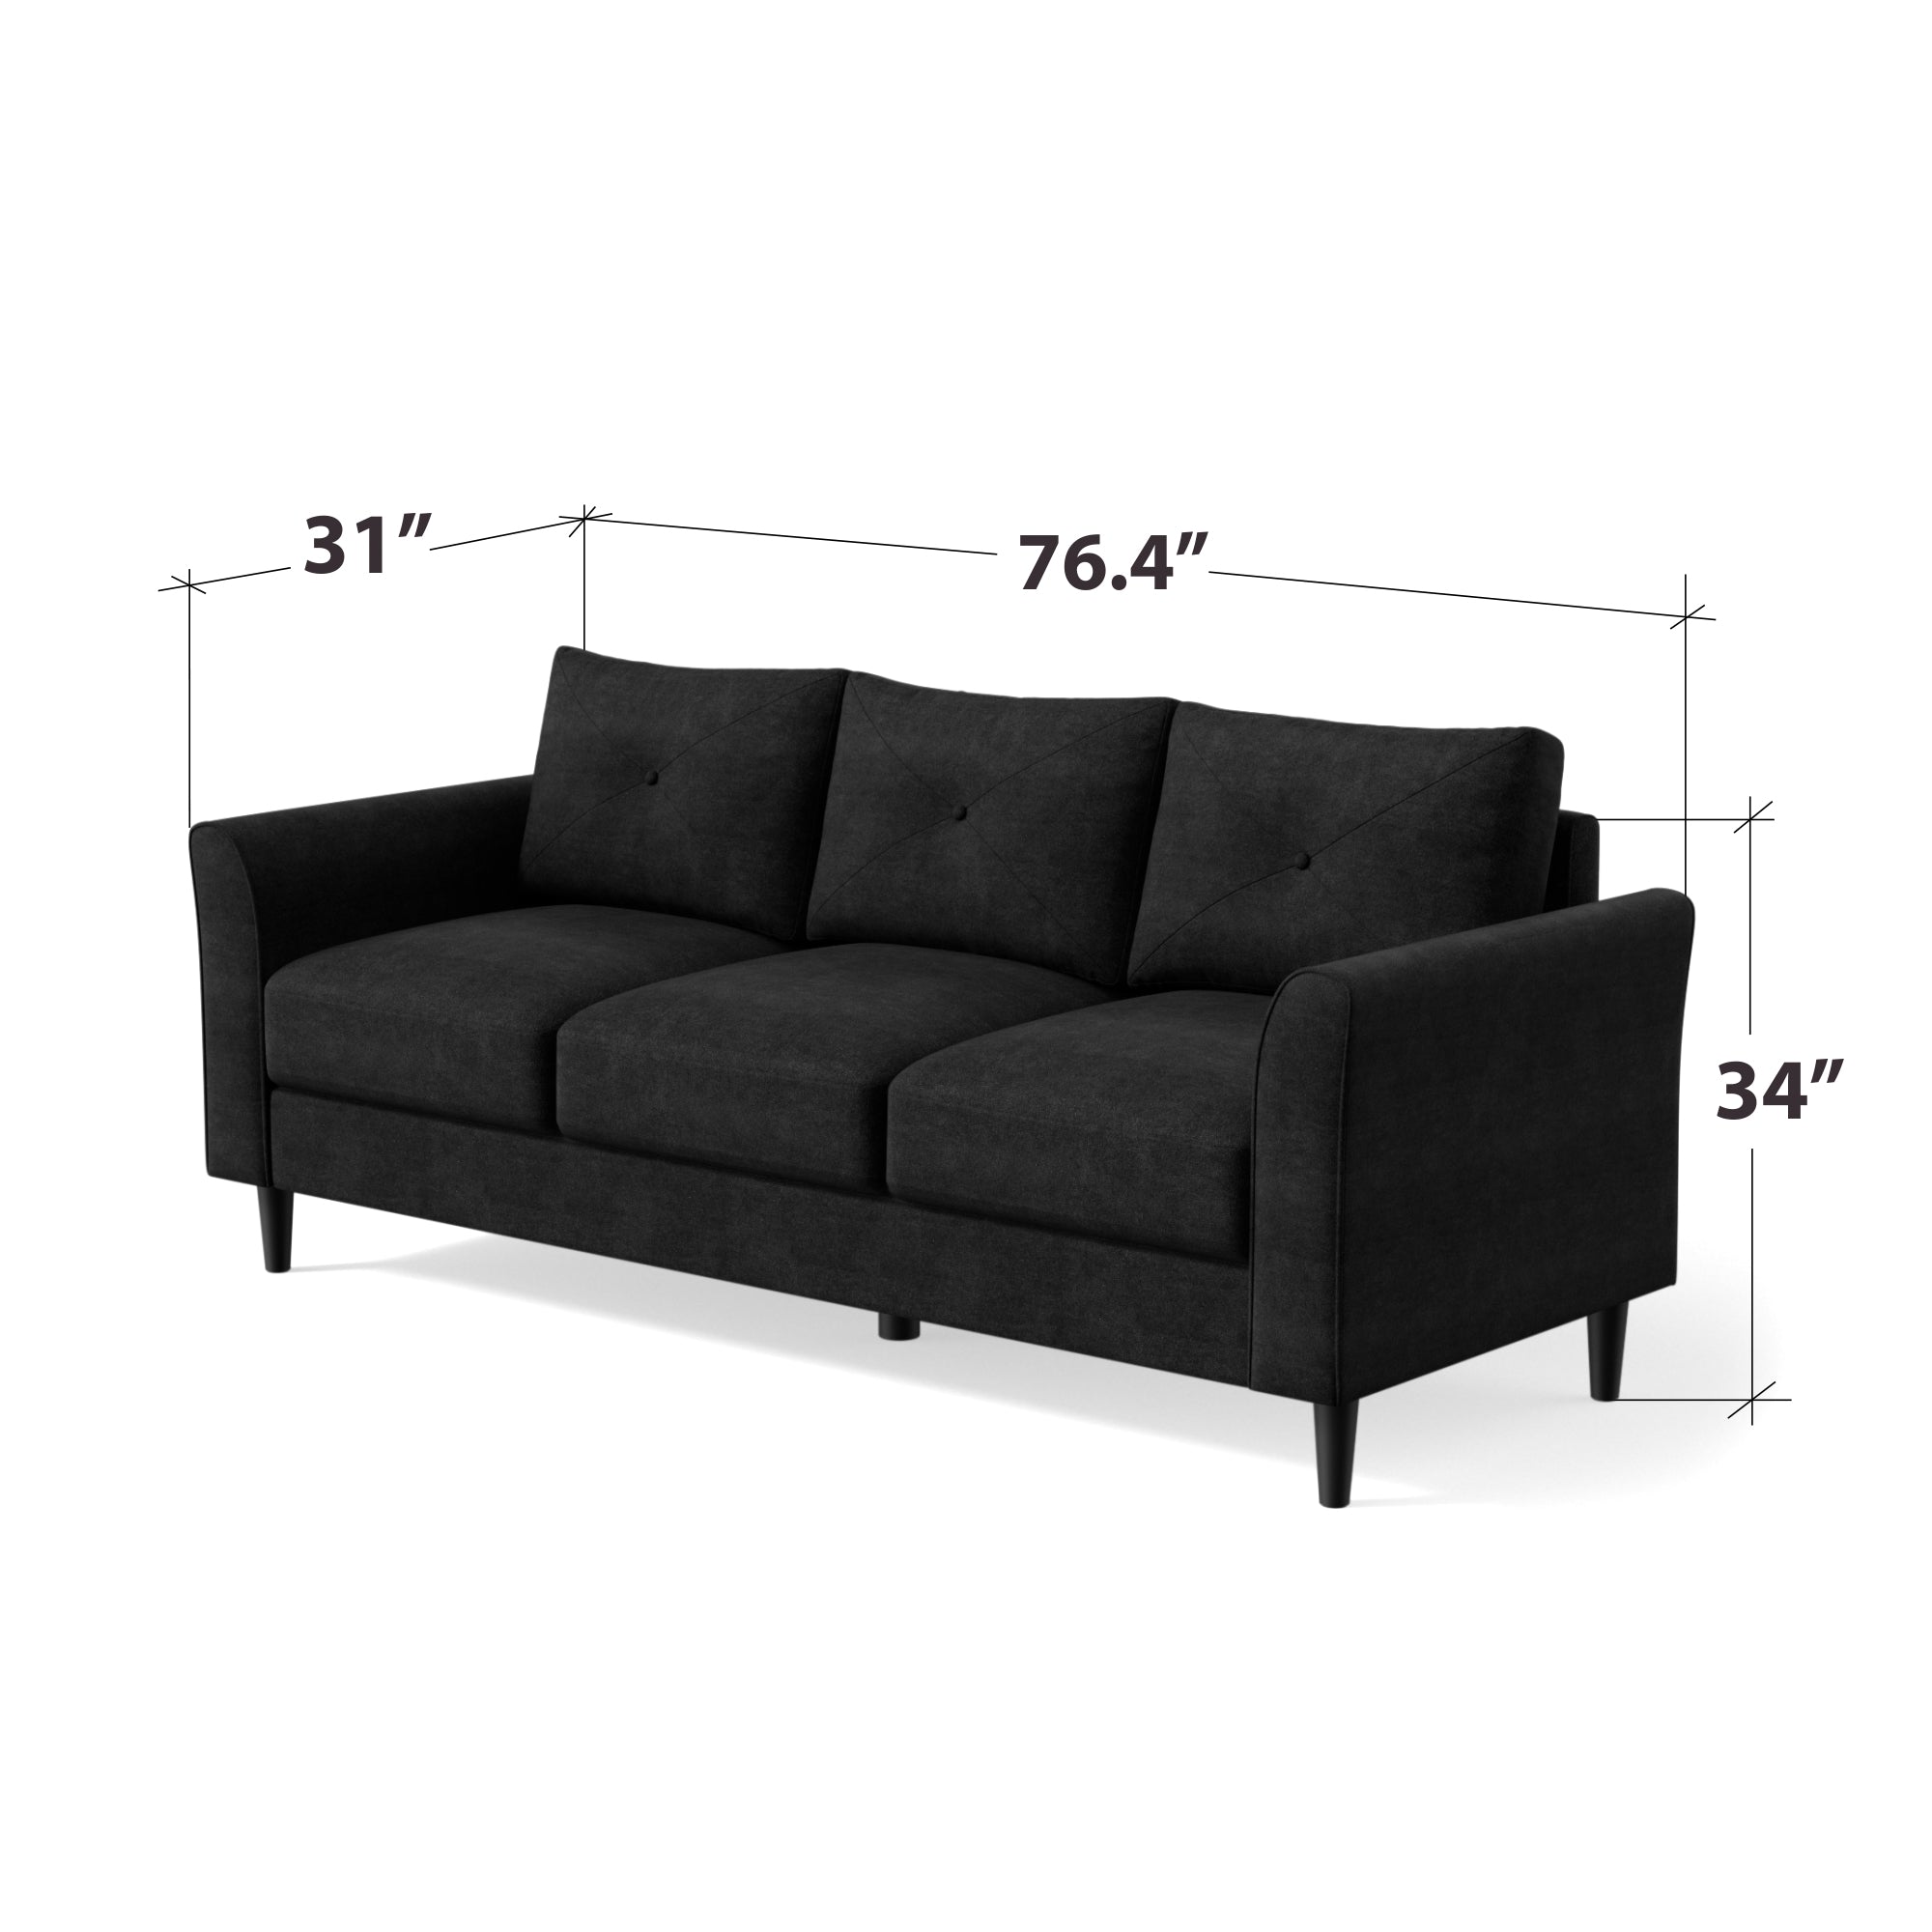 black 3 seater sofa with button tufting dimensions 76.4" wide